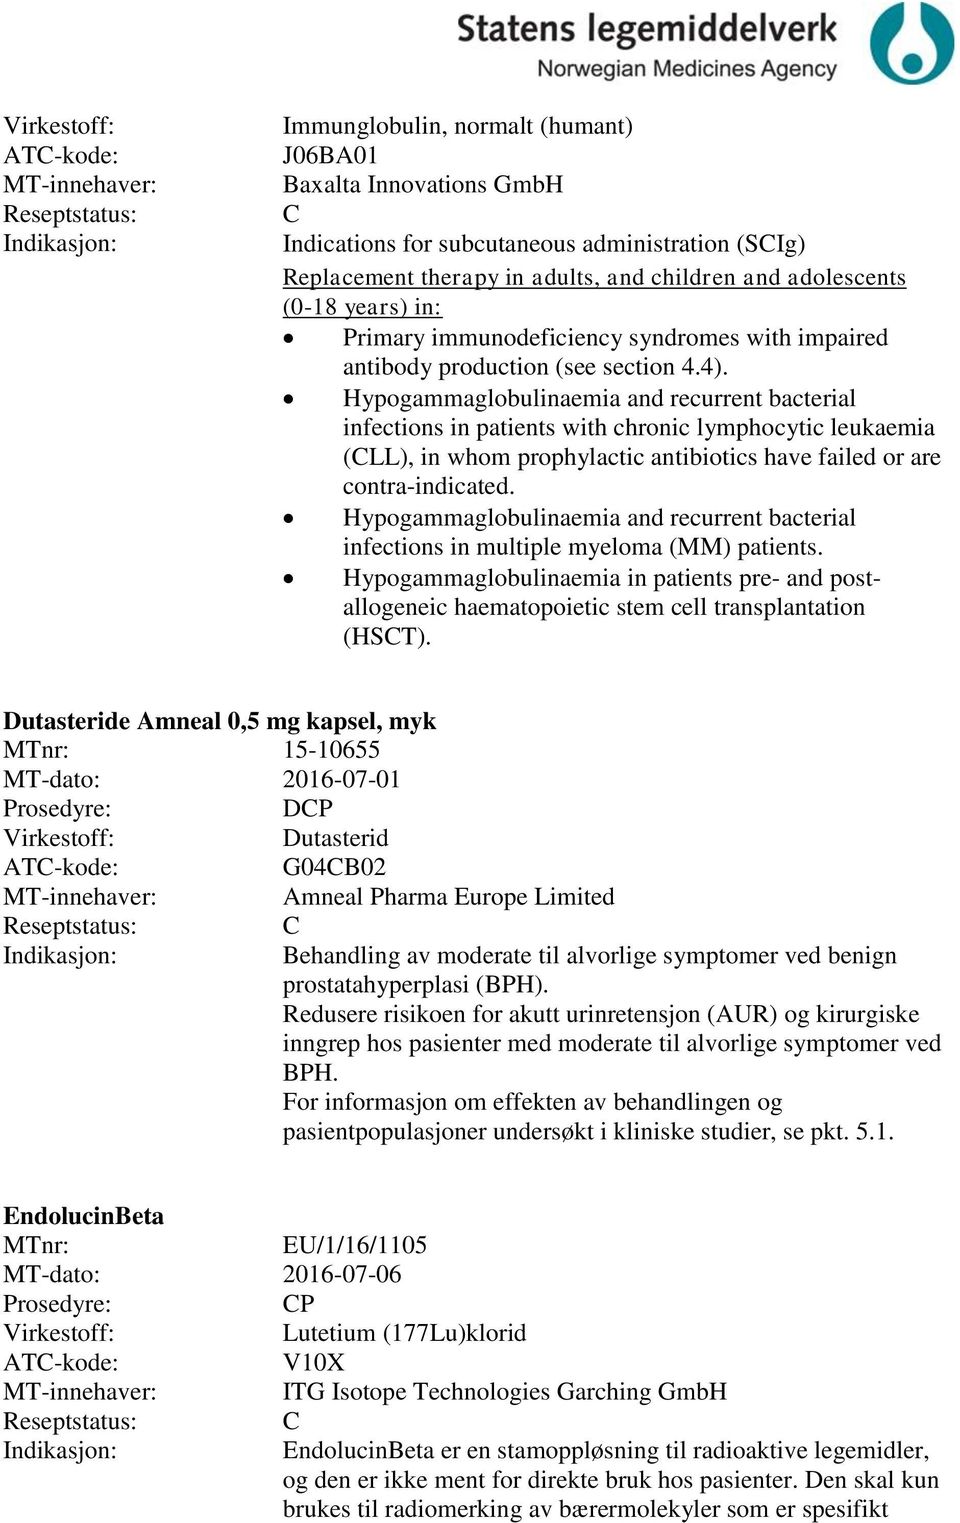 Hypogammaglobulinaemia and recurrent bacterial infections in patients with chronic lymphocytic leukaemia (LL), in whom prophylactic antibiotics have failed or are contra-indicated.